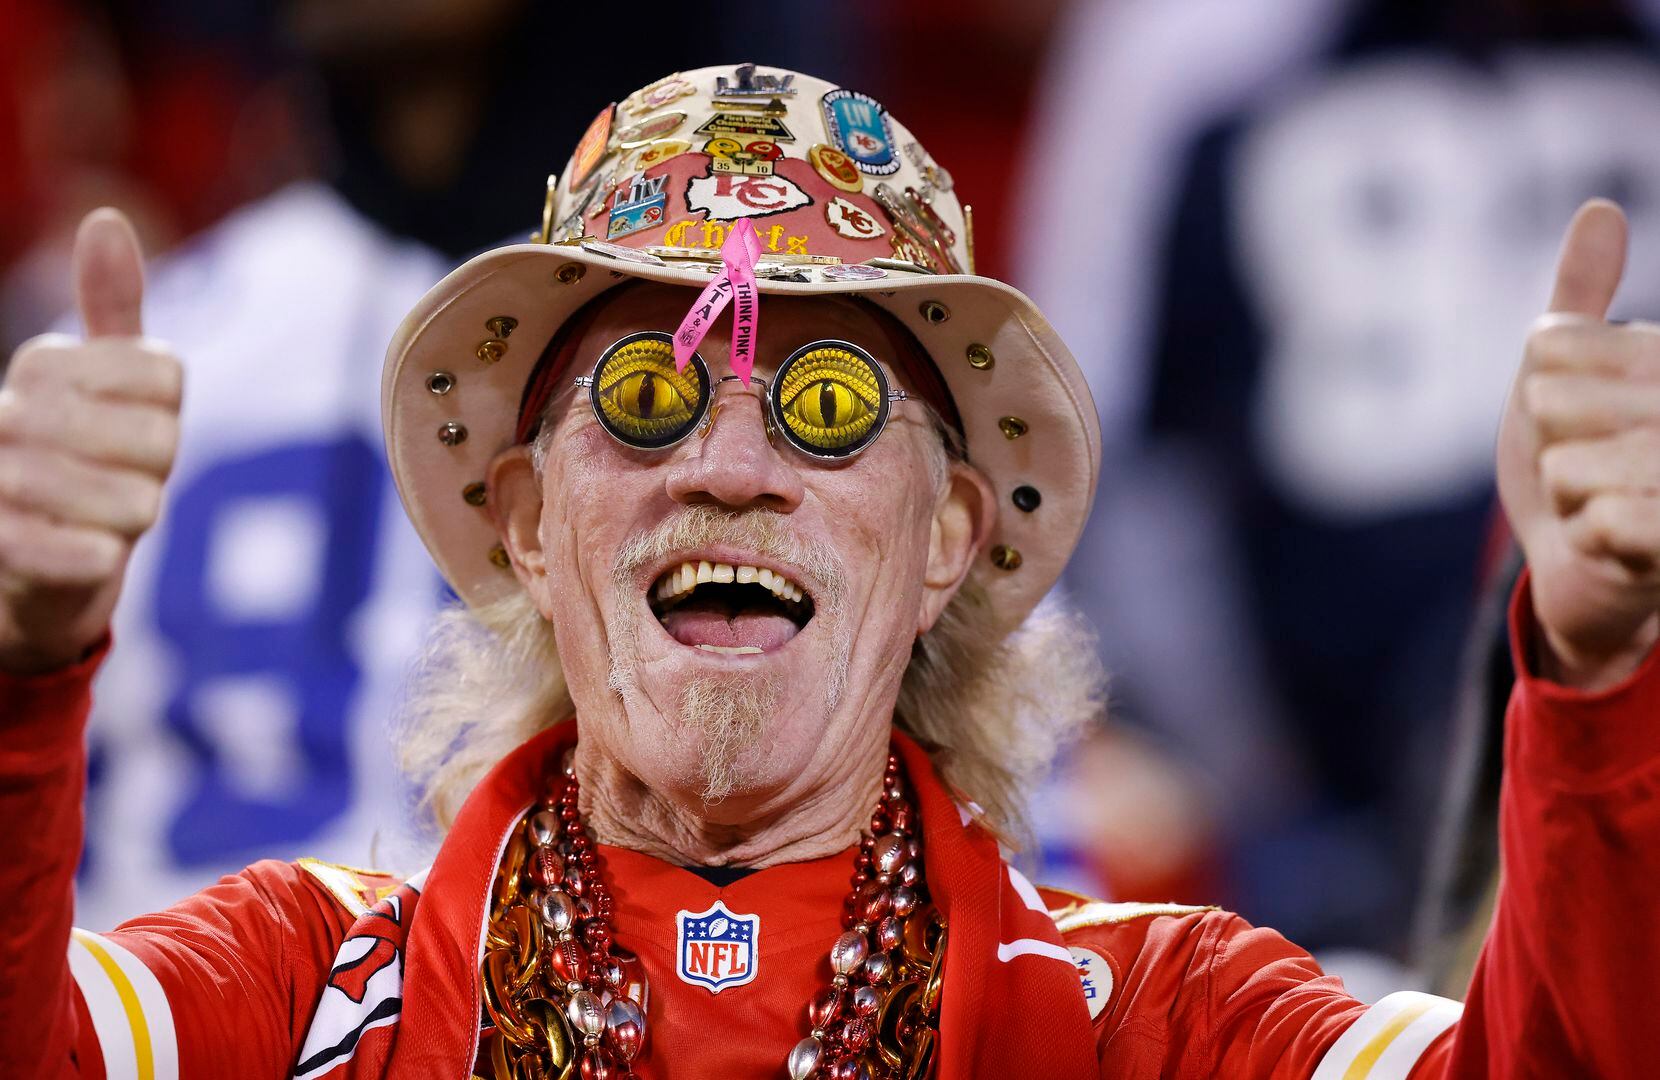 A Kansas City Chiefs fans gives a thumbs up to his team beating the Dallas Cowboys in the second half at Arrowhead Stadium in Kansas City, Missouri, November 21, 2021. The Cowboys lost, 19-9. (Tom Fox/The Dallas Morning News)